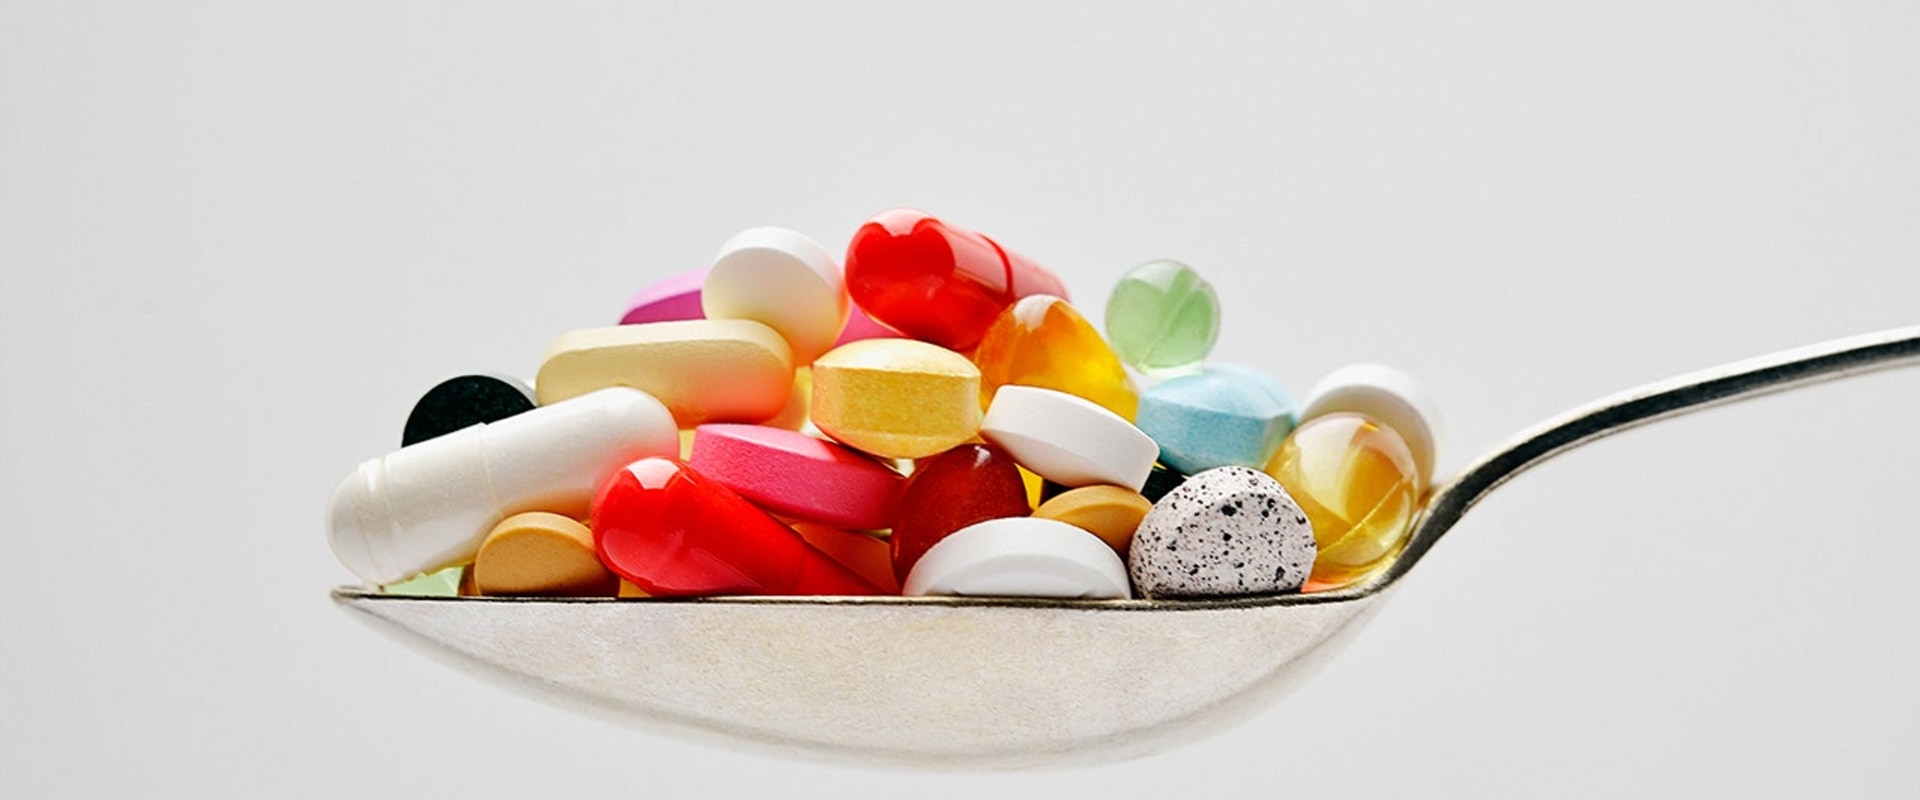 Can too many supplements be harmful?